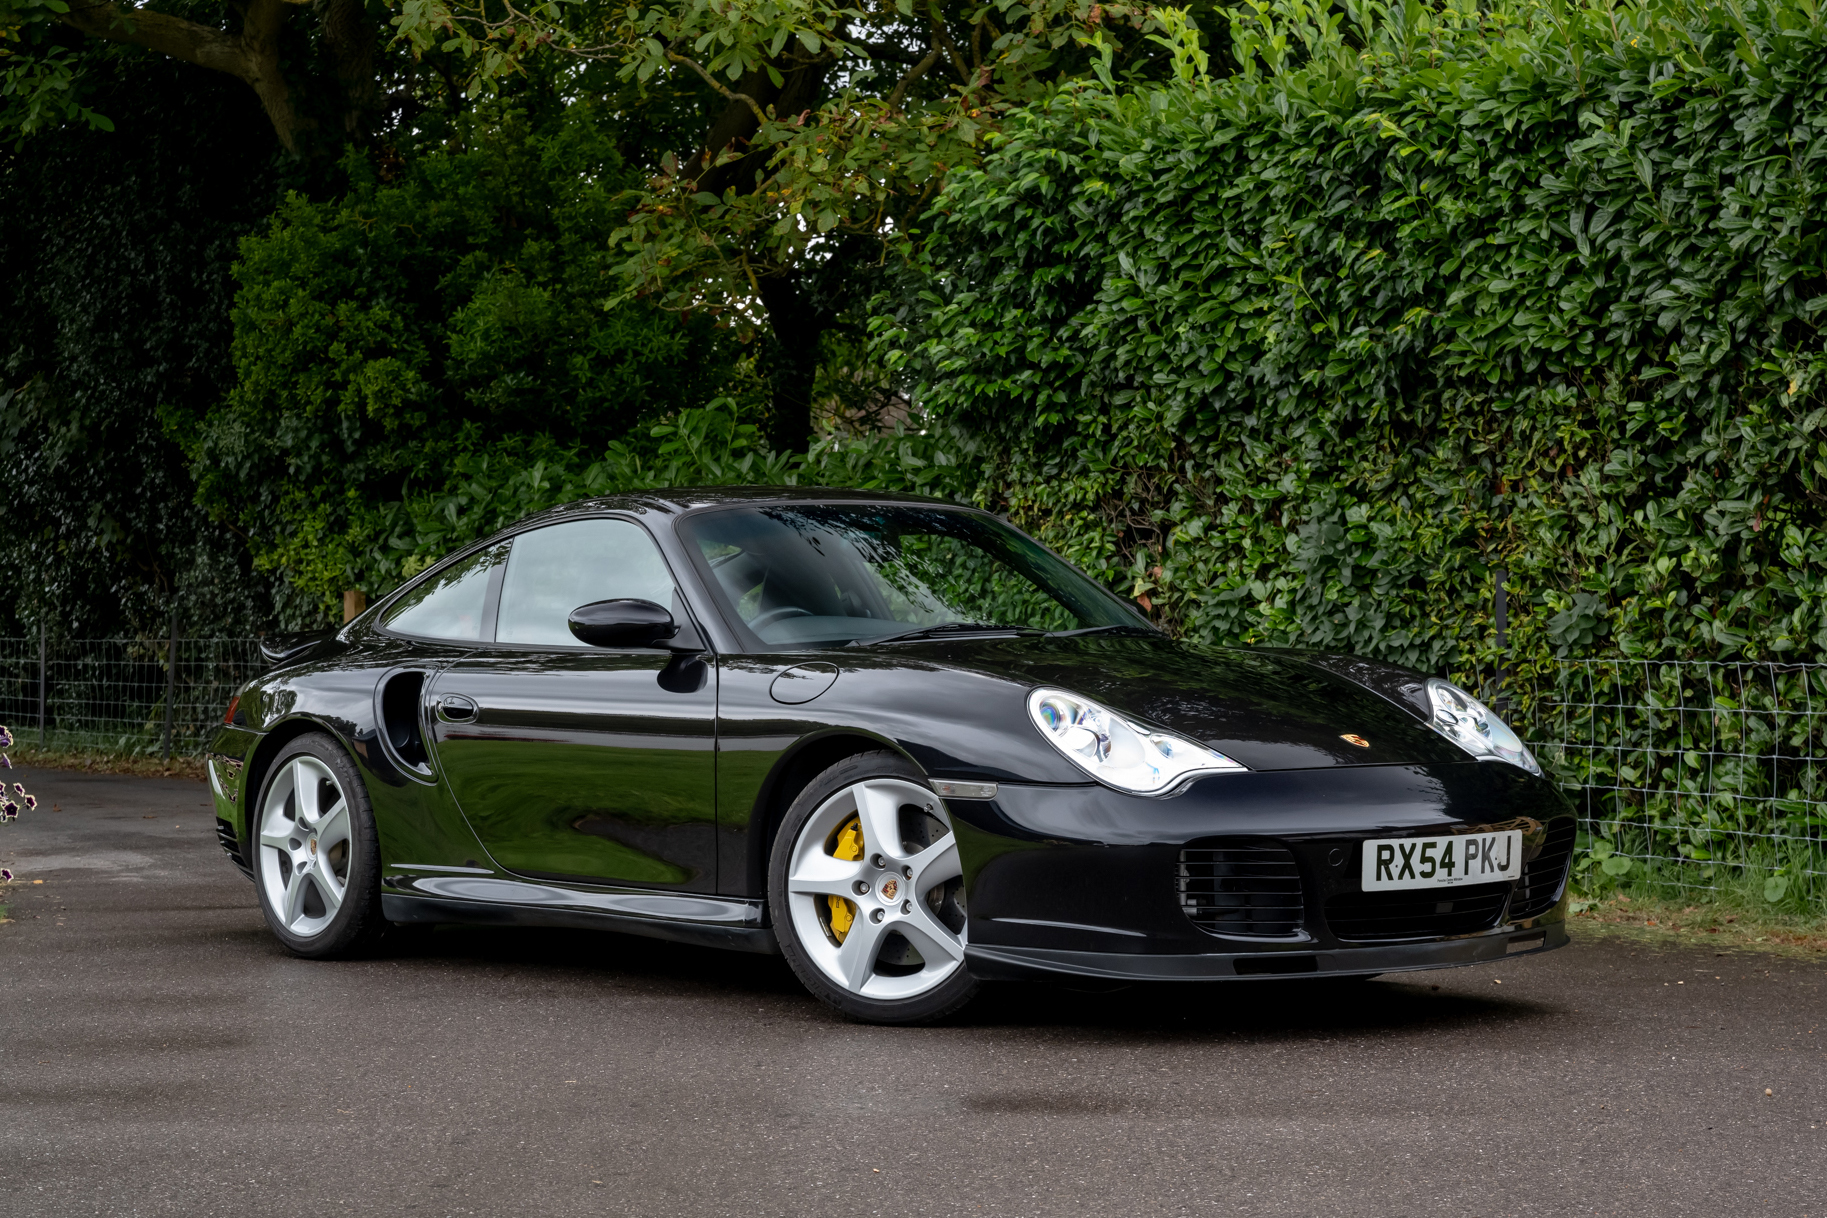 2004 PORSCHE 911 (996) TURBO S for sale by auction in Horton, Berkshire, United Kingdom image image